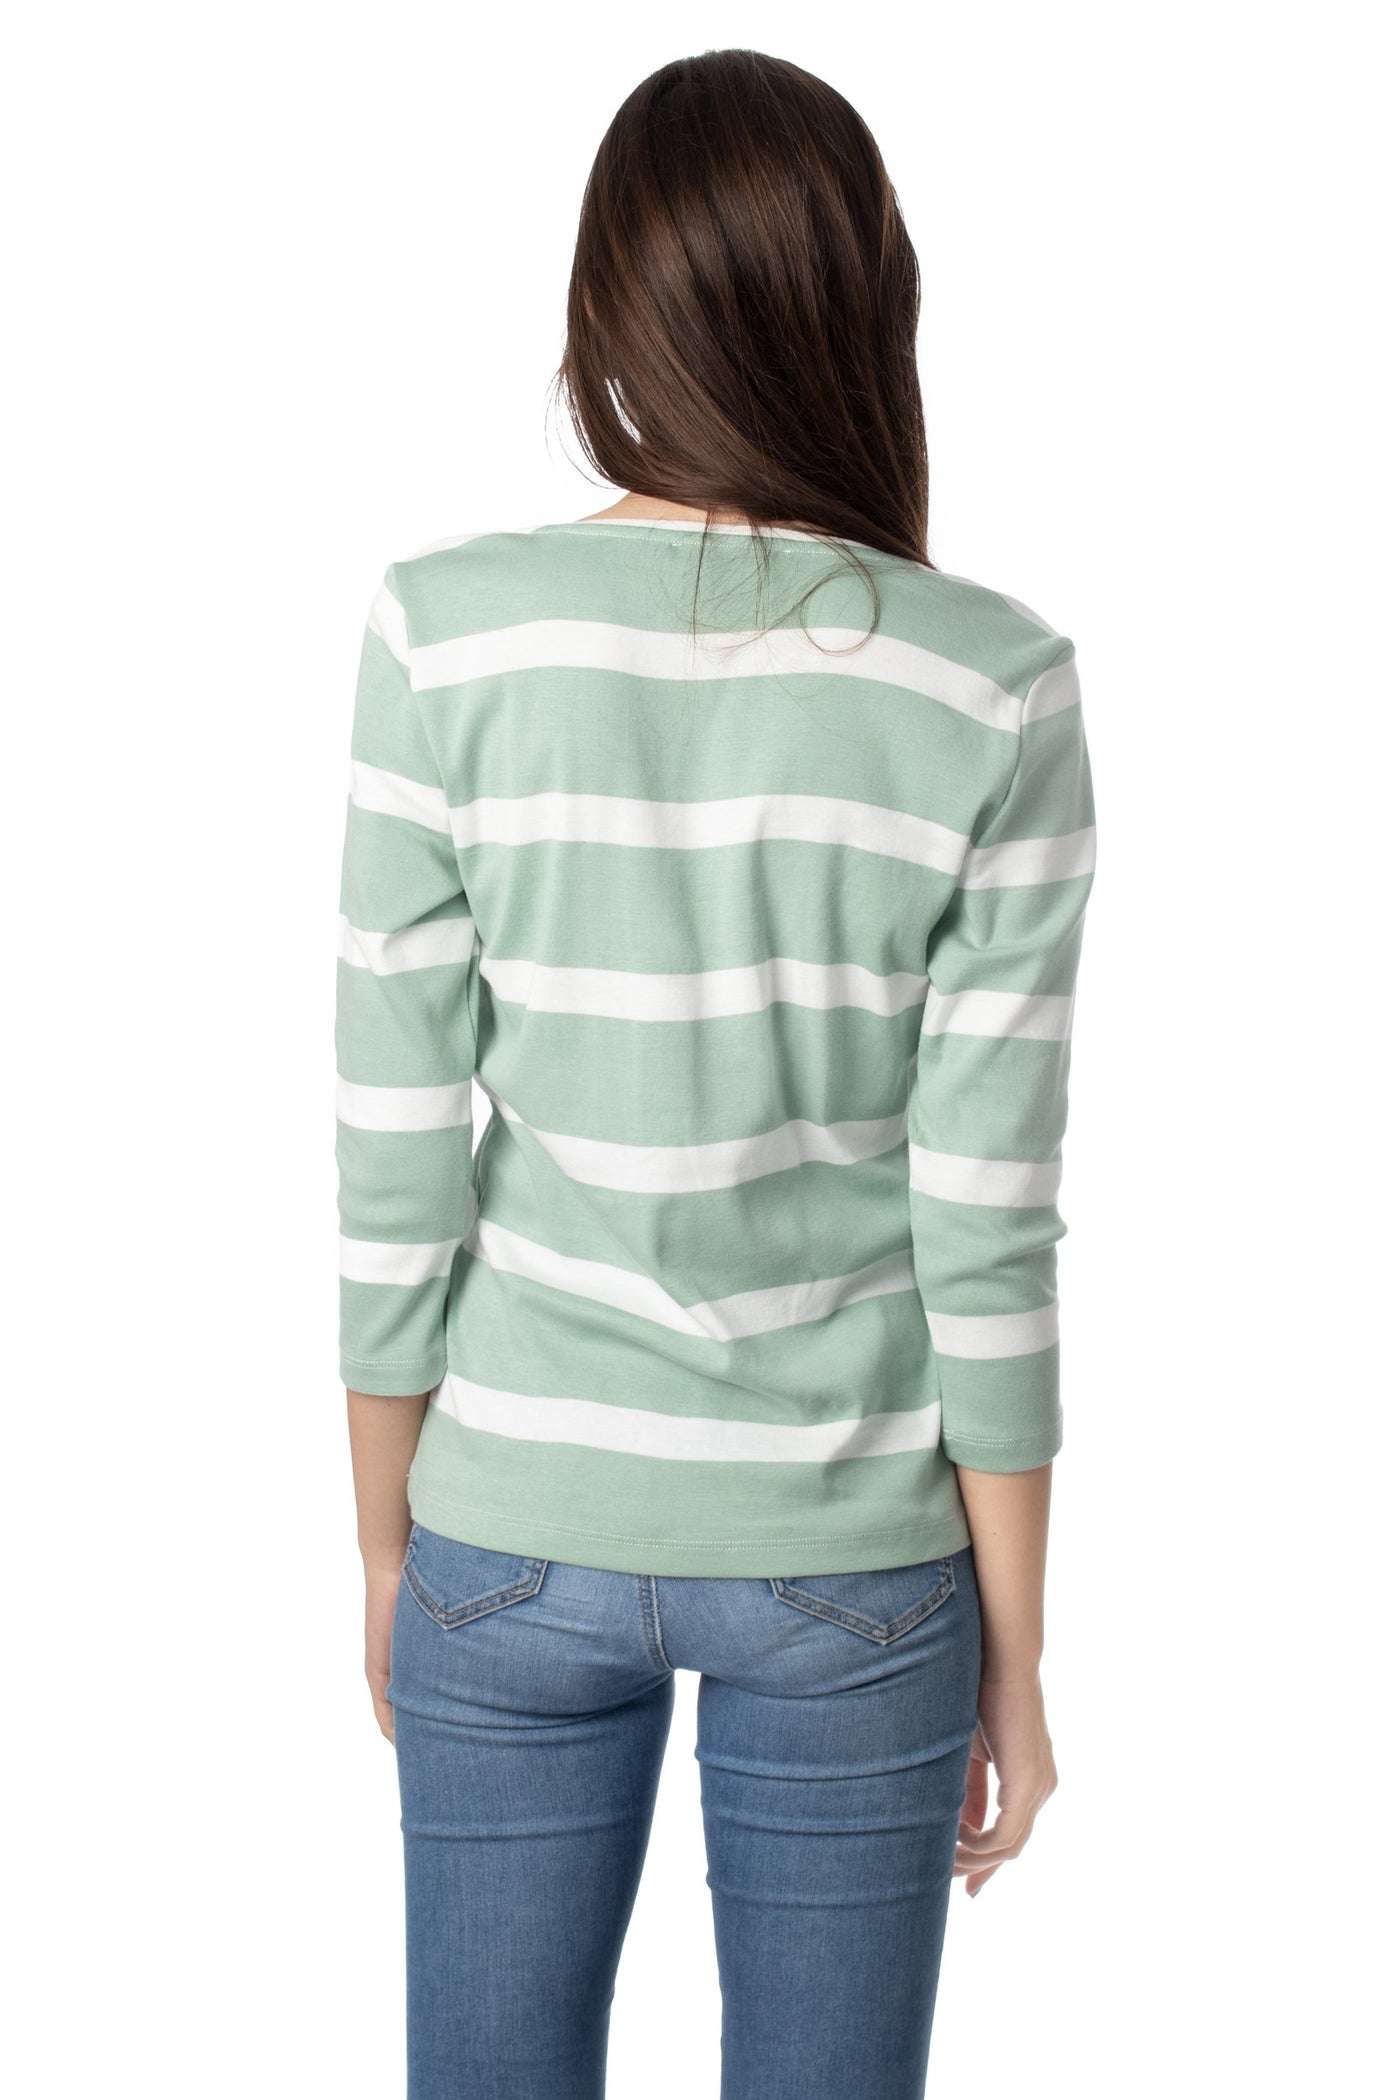 chassca  boat neck with button striped  t-shirt - Breakmood